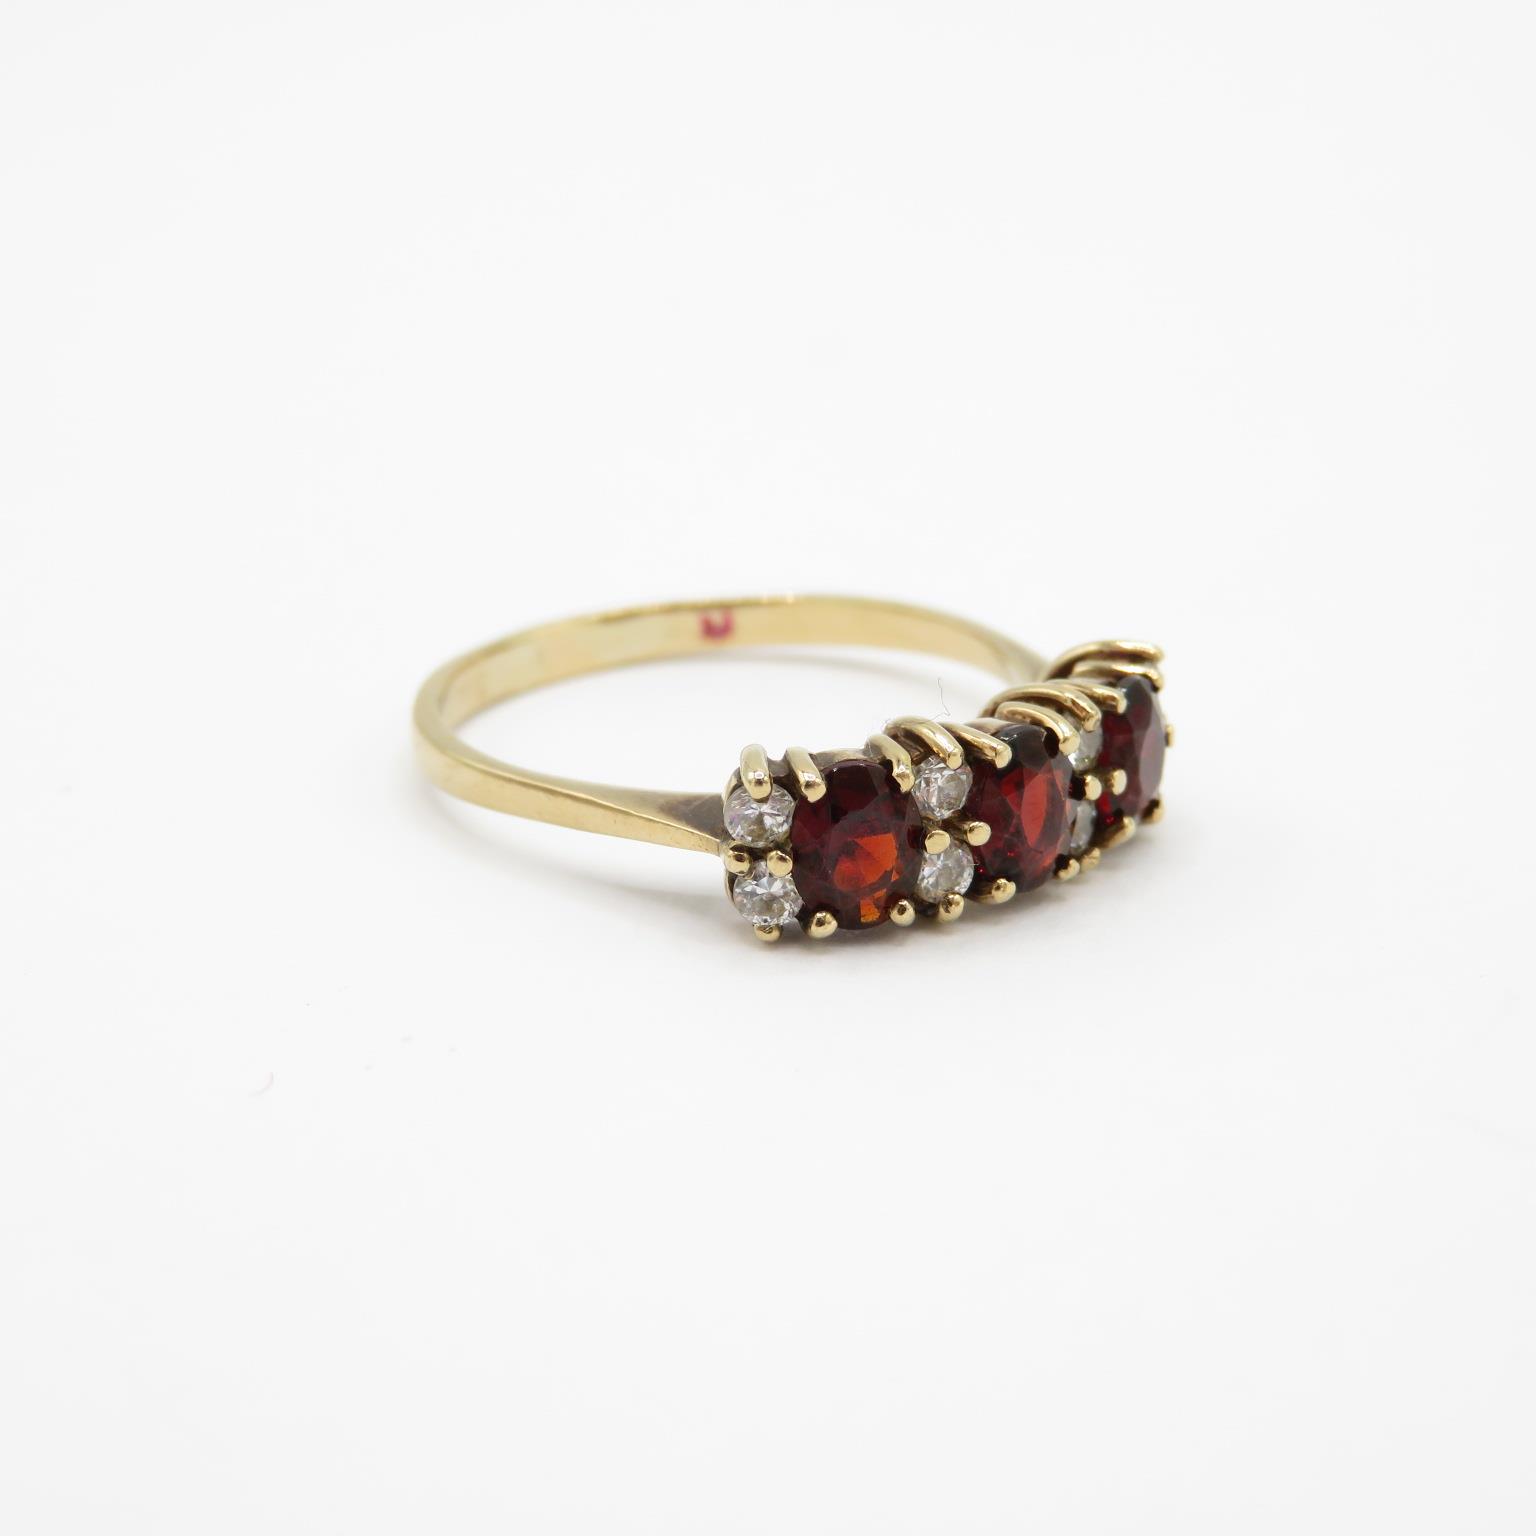 HM 9ct gold dress ring with garnets and white stones (2.5g) Size R - Image 3 of 4